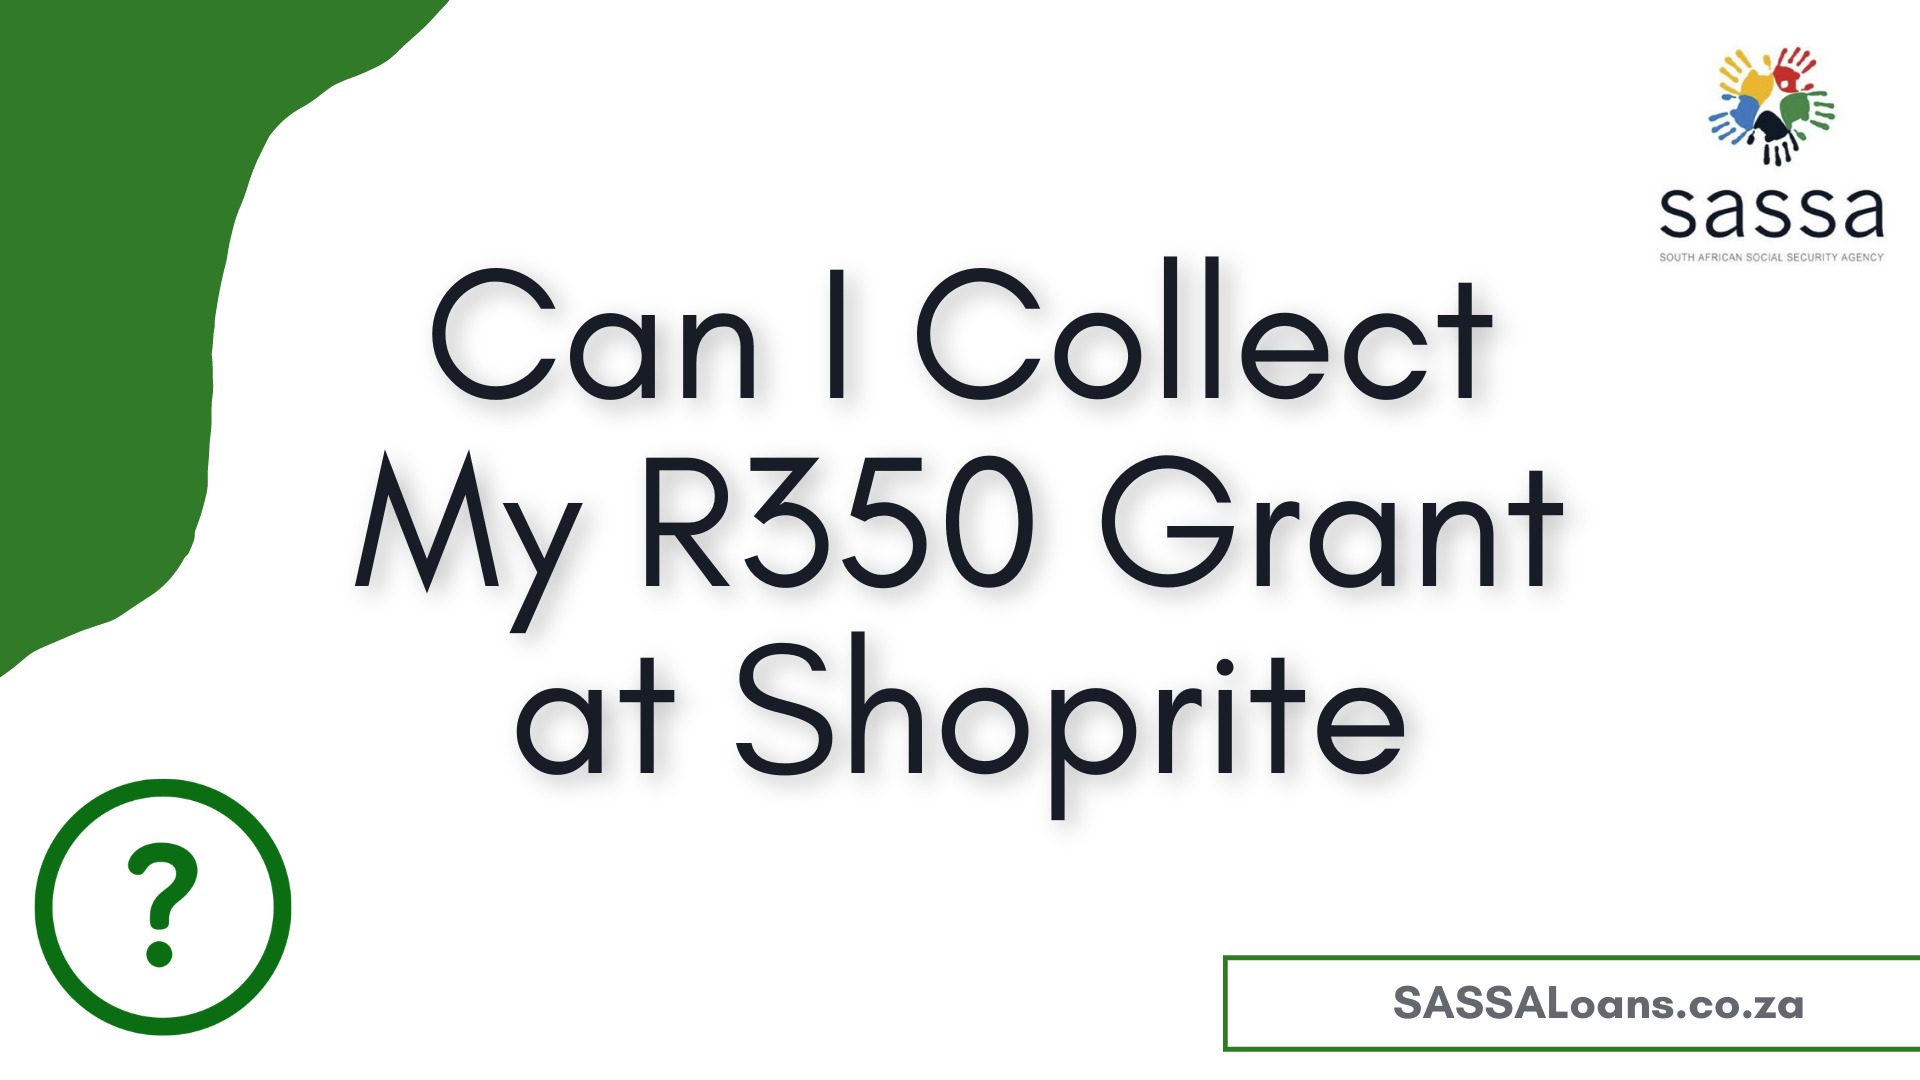 Can I Collect My R350 Grant at Shoprite?